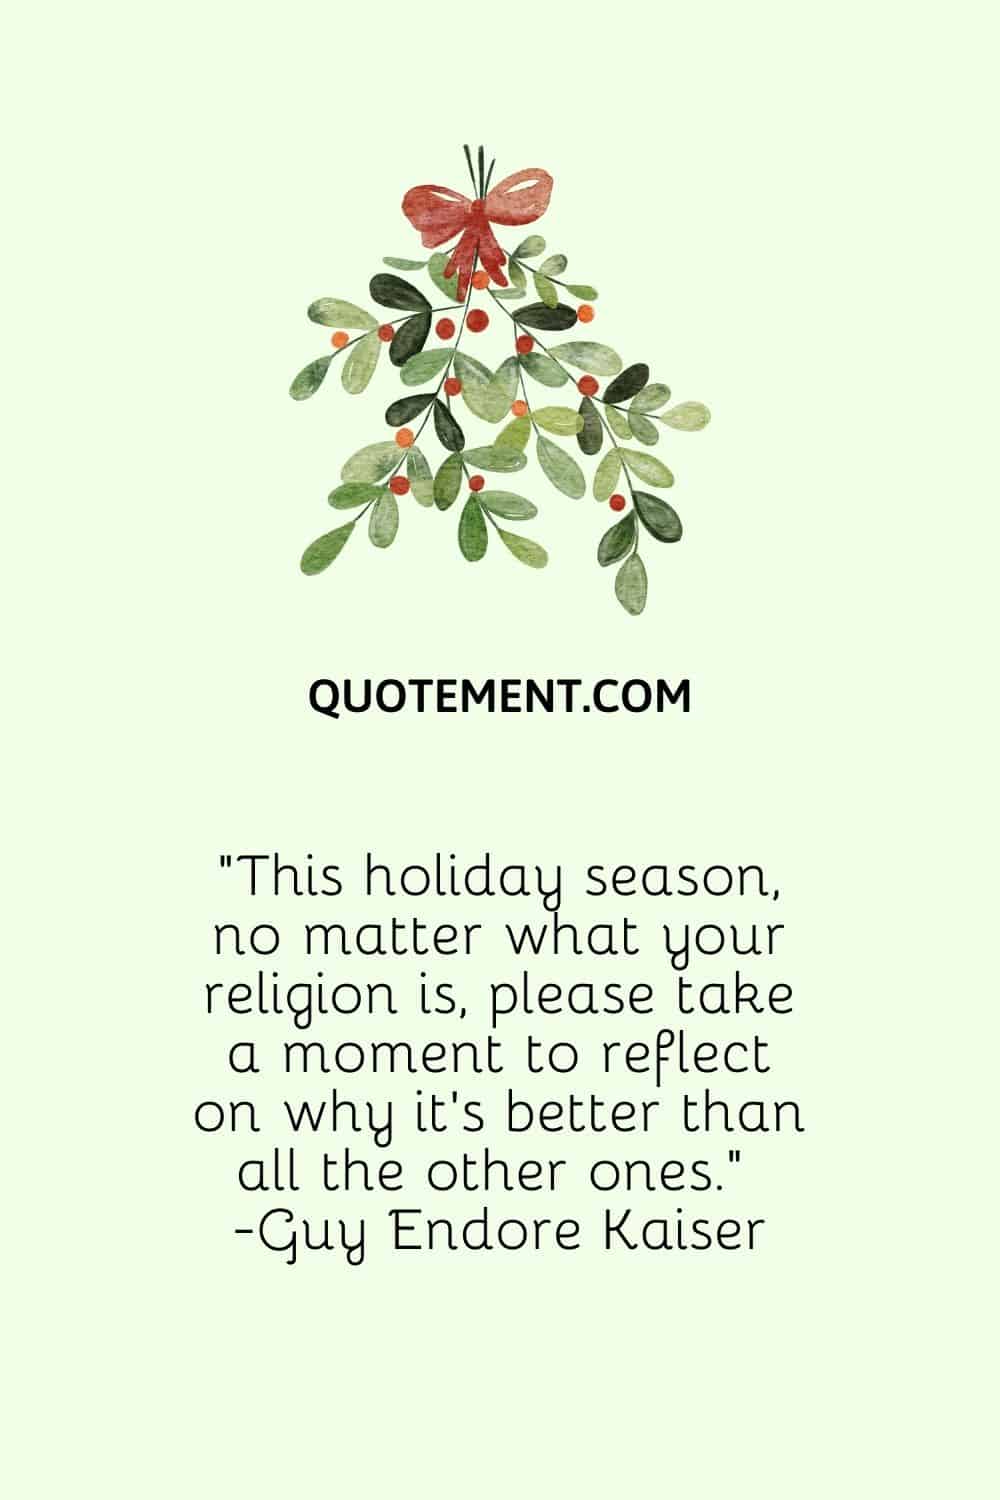 “This holiday season, no matter what your religion is, please take a moment to reflect on why it’s better than all the other ones.” — Guy Endore Kaiser